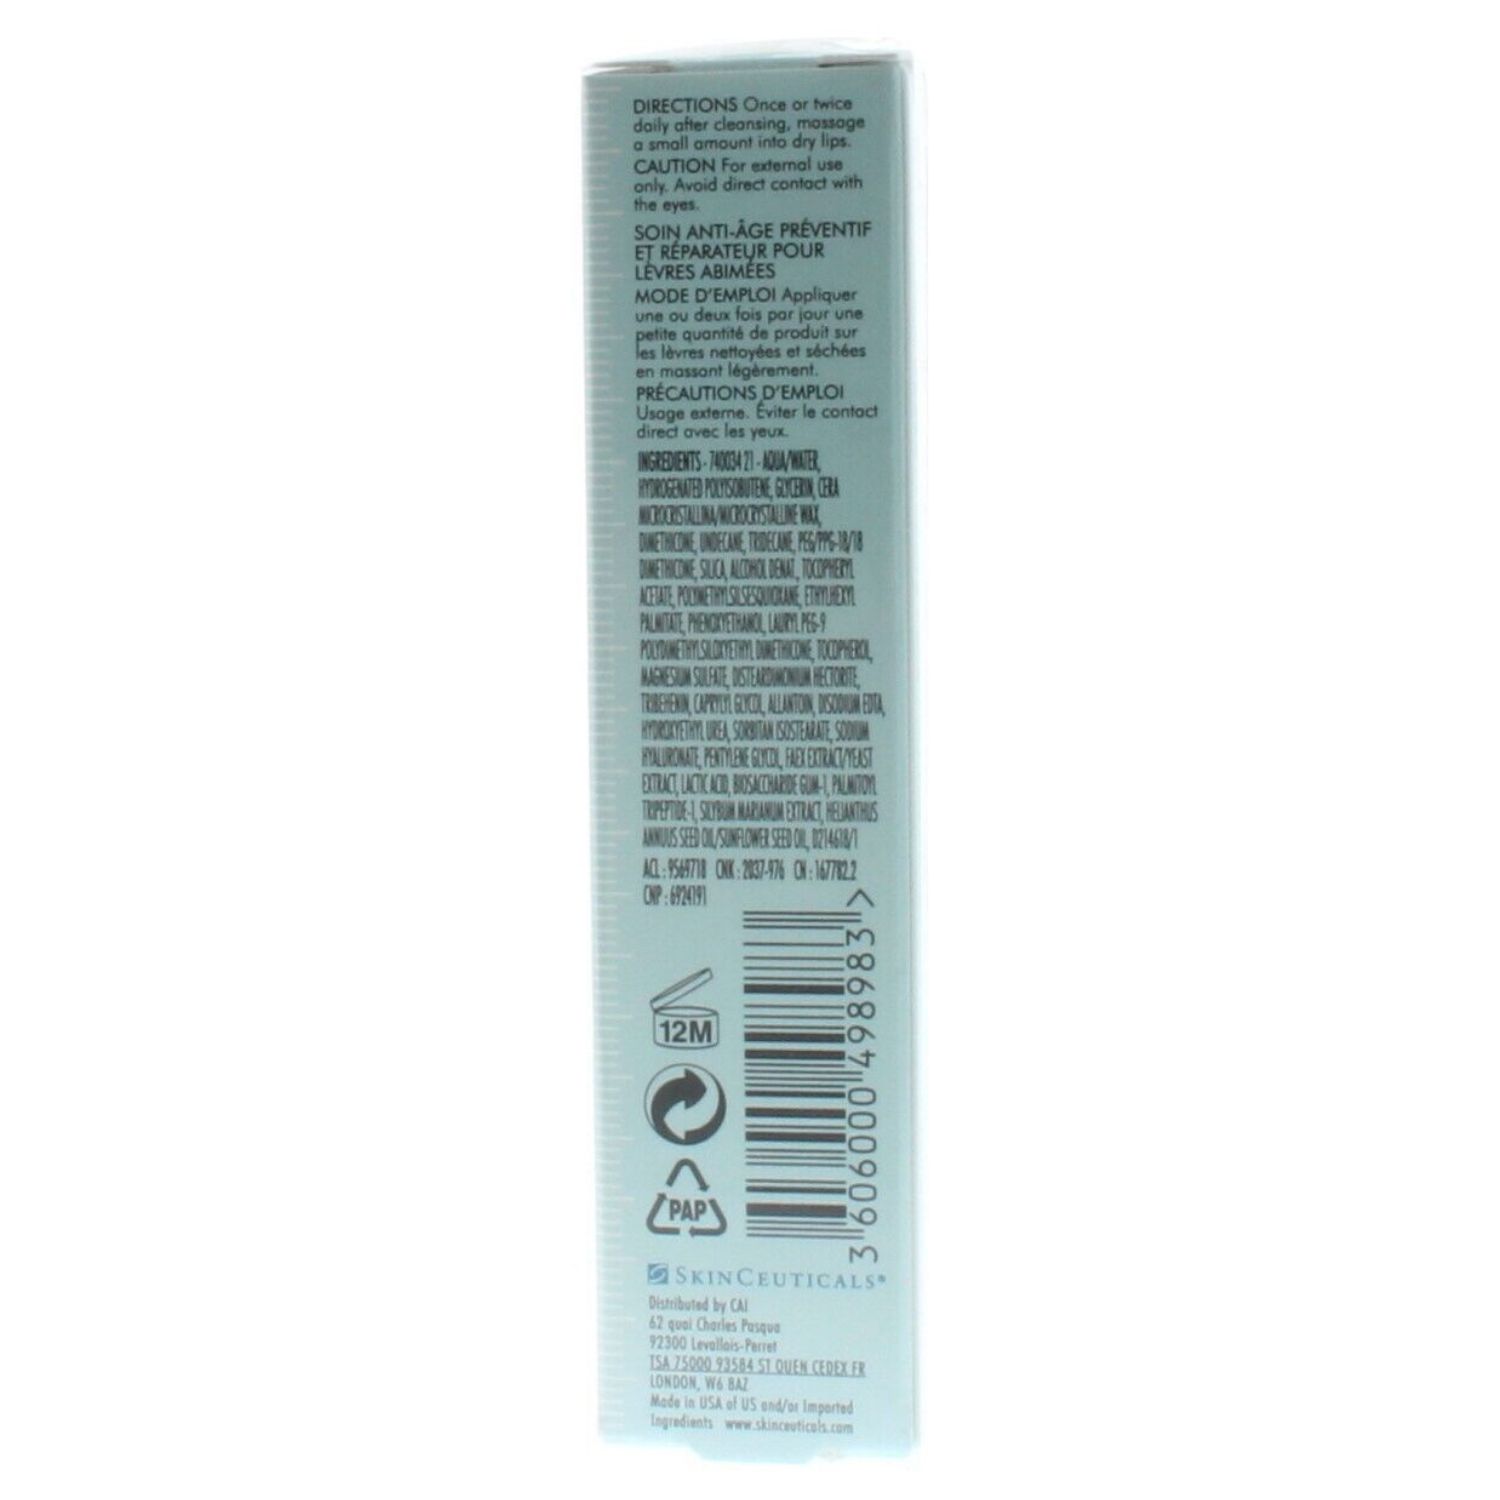 SkinCeuticals Antioxidant Lip Repair for Damaged or Aging Lips 0.34 oz - image 5 of 5